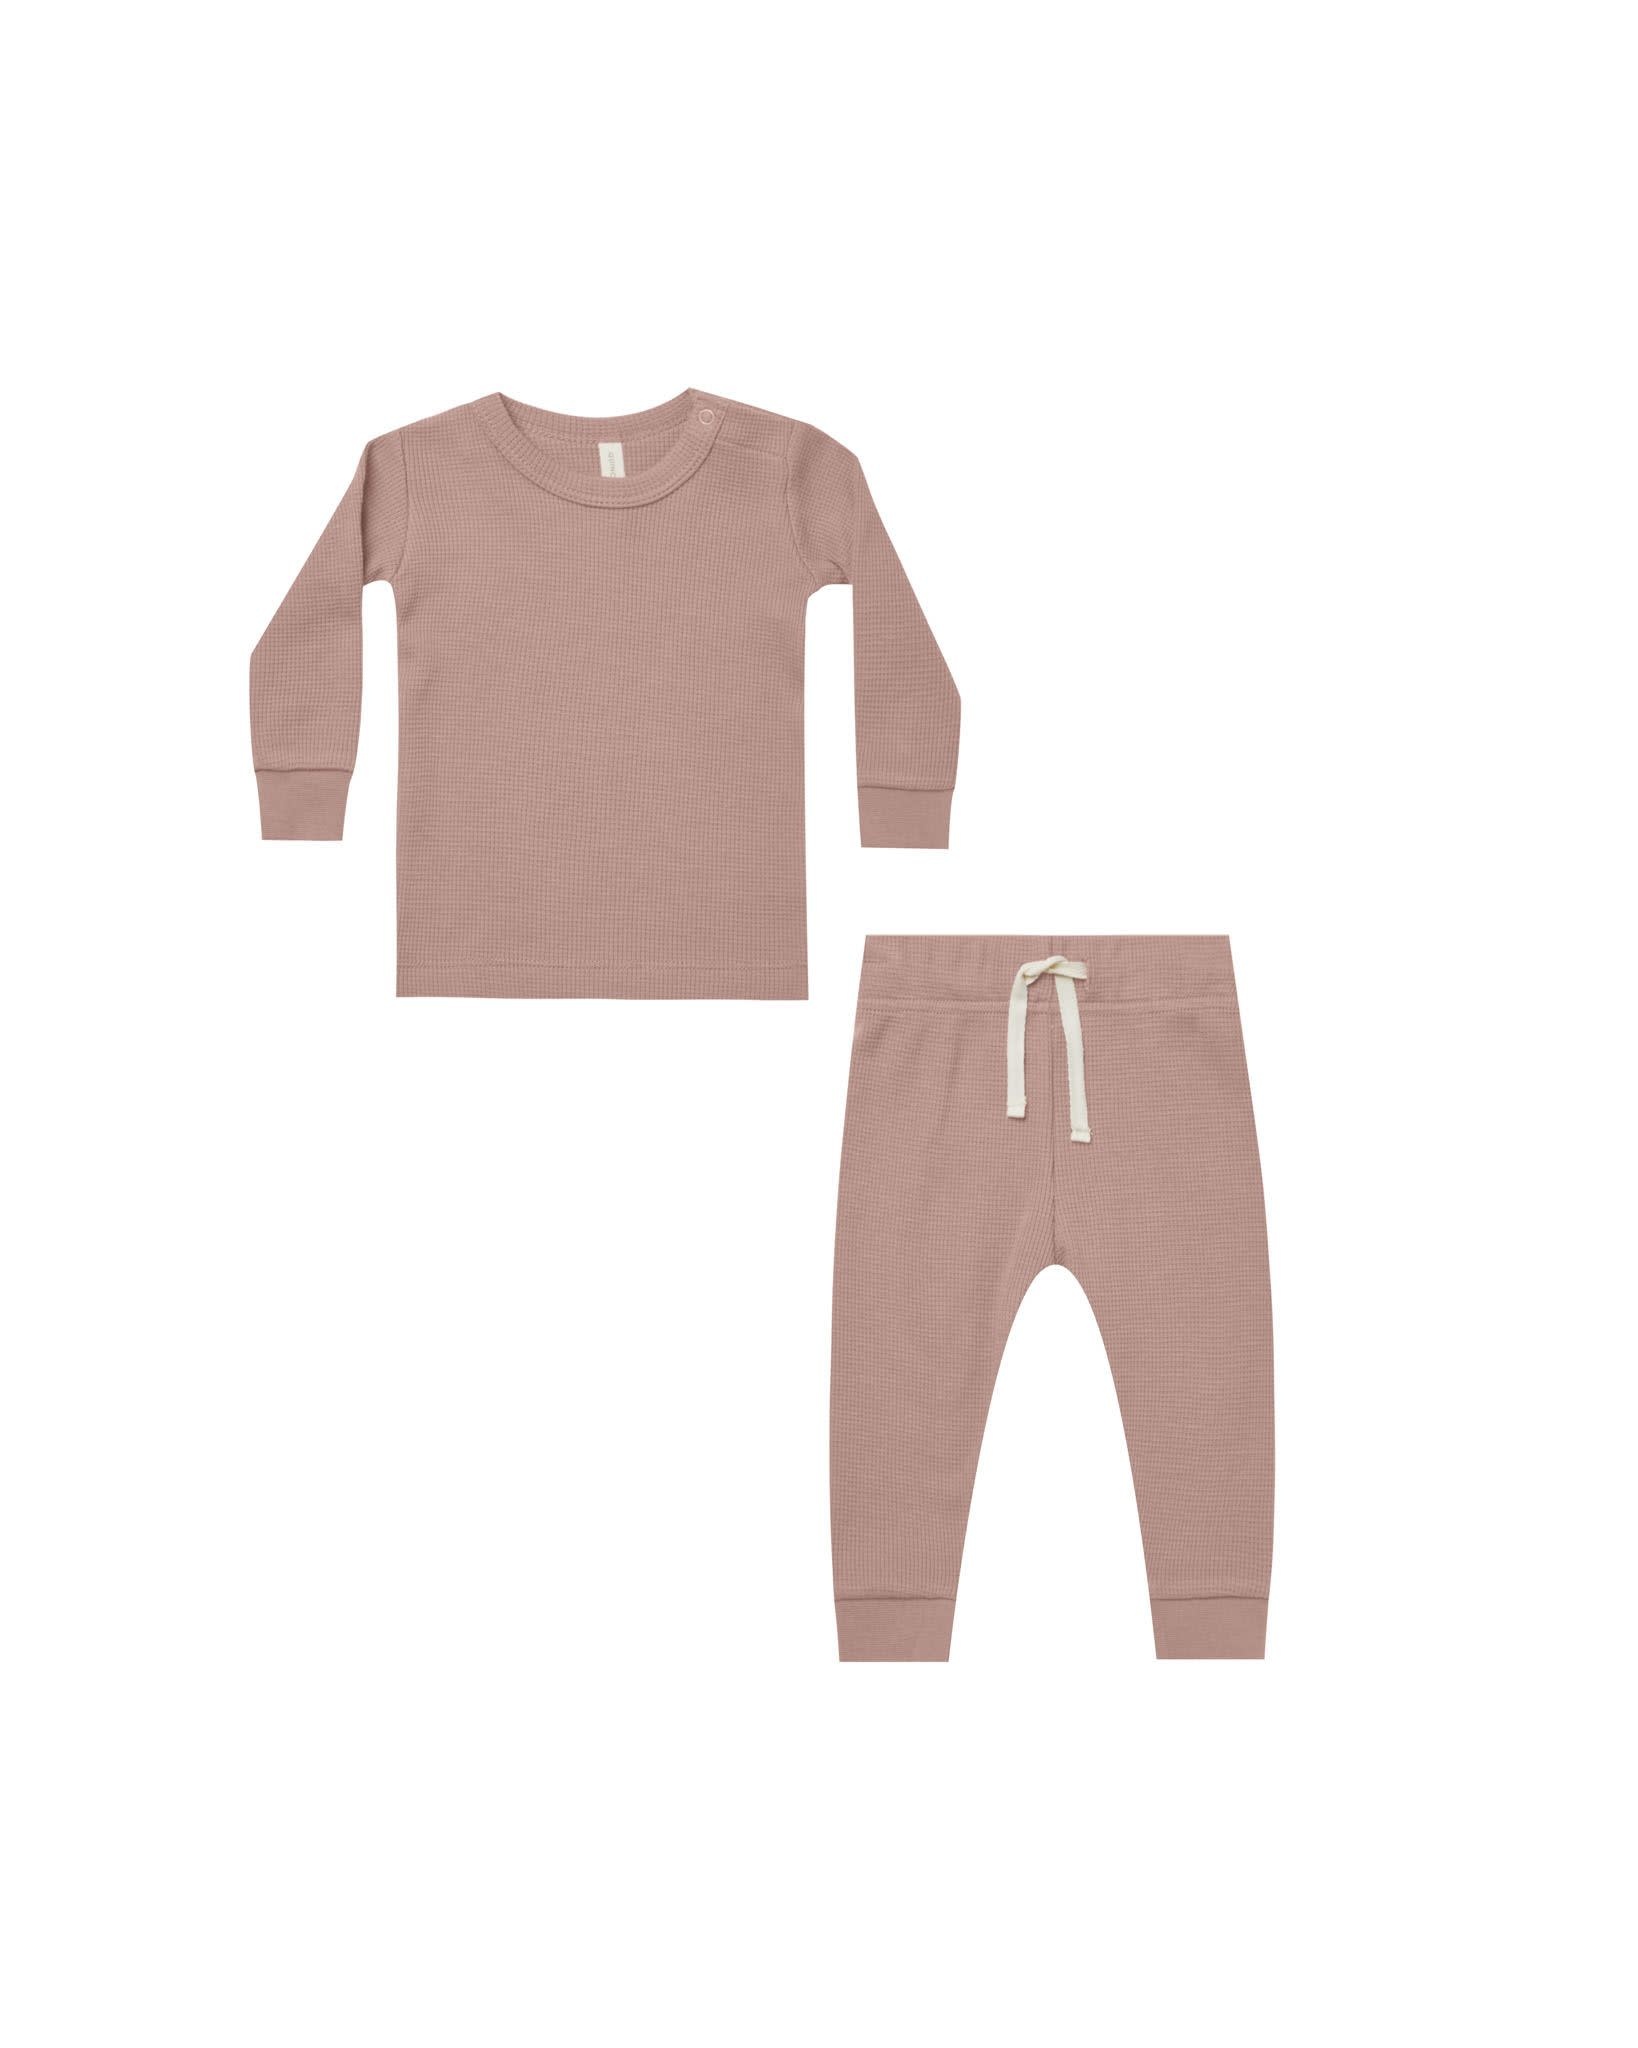 Quincy Mae Quincy Mae Waffle Top and Pant Set